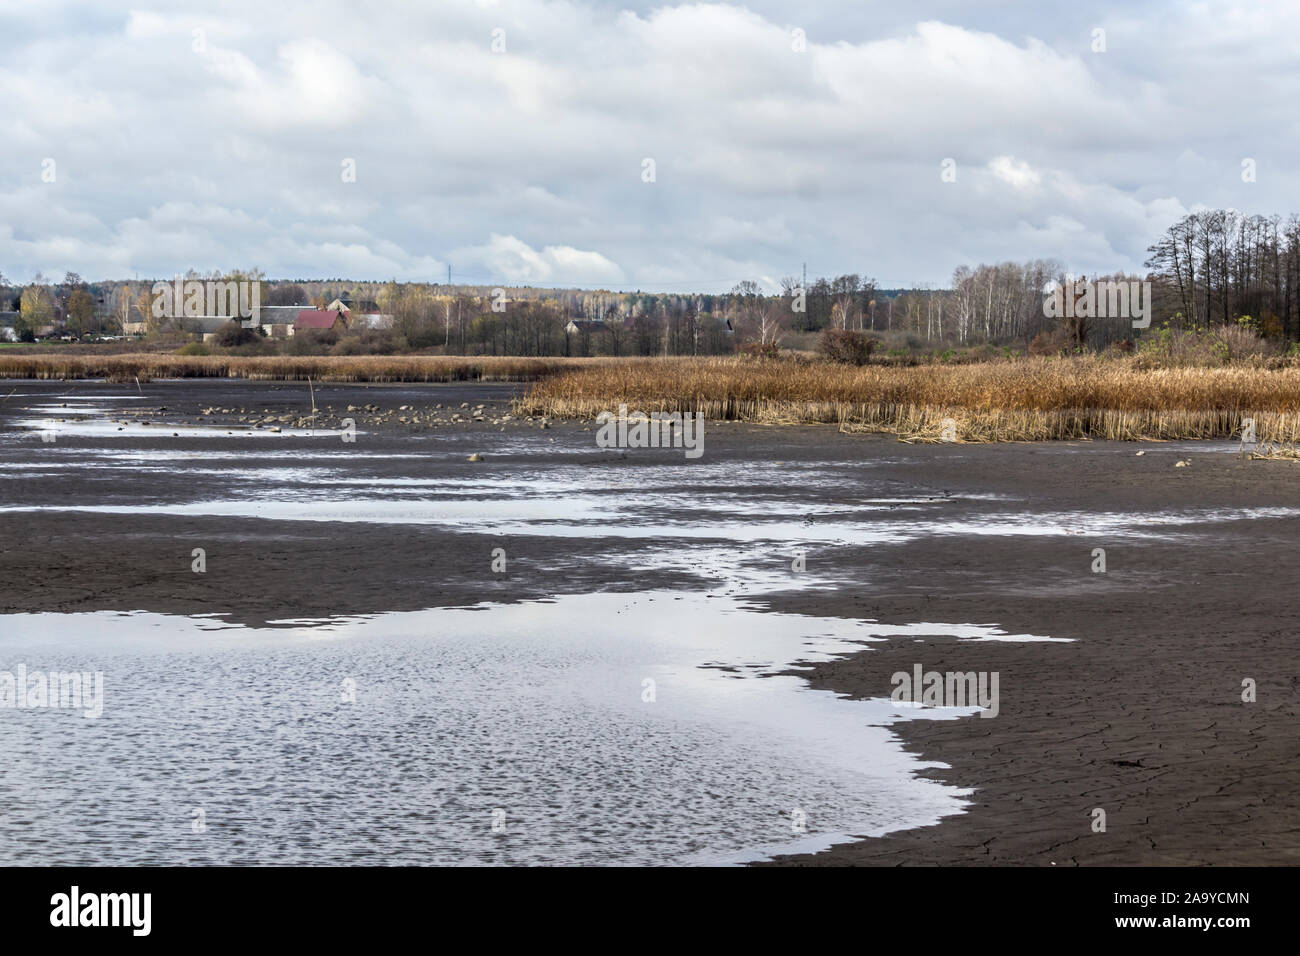 Pond for breeding fish without water.The dry bottom is covered with cracks and stones.The village in the background.Fishing industry.Podlasie, Poland. Stock Photo